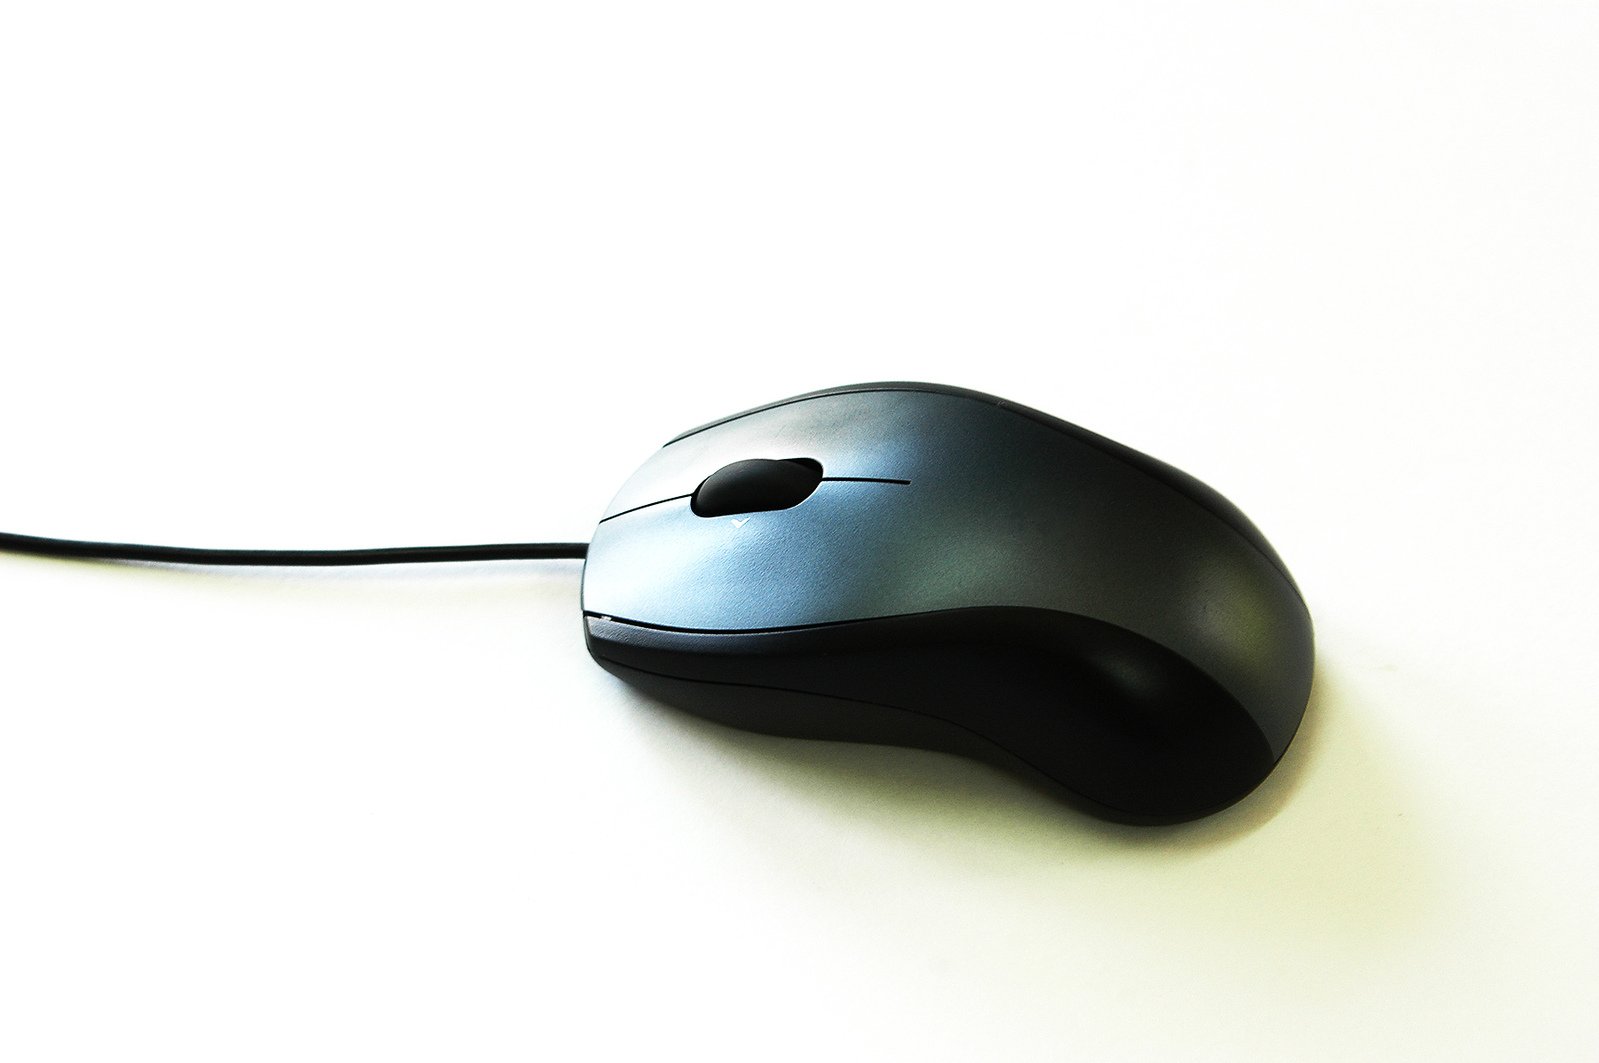 the computer mouse has a black receiver on it